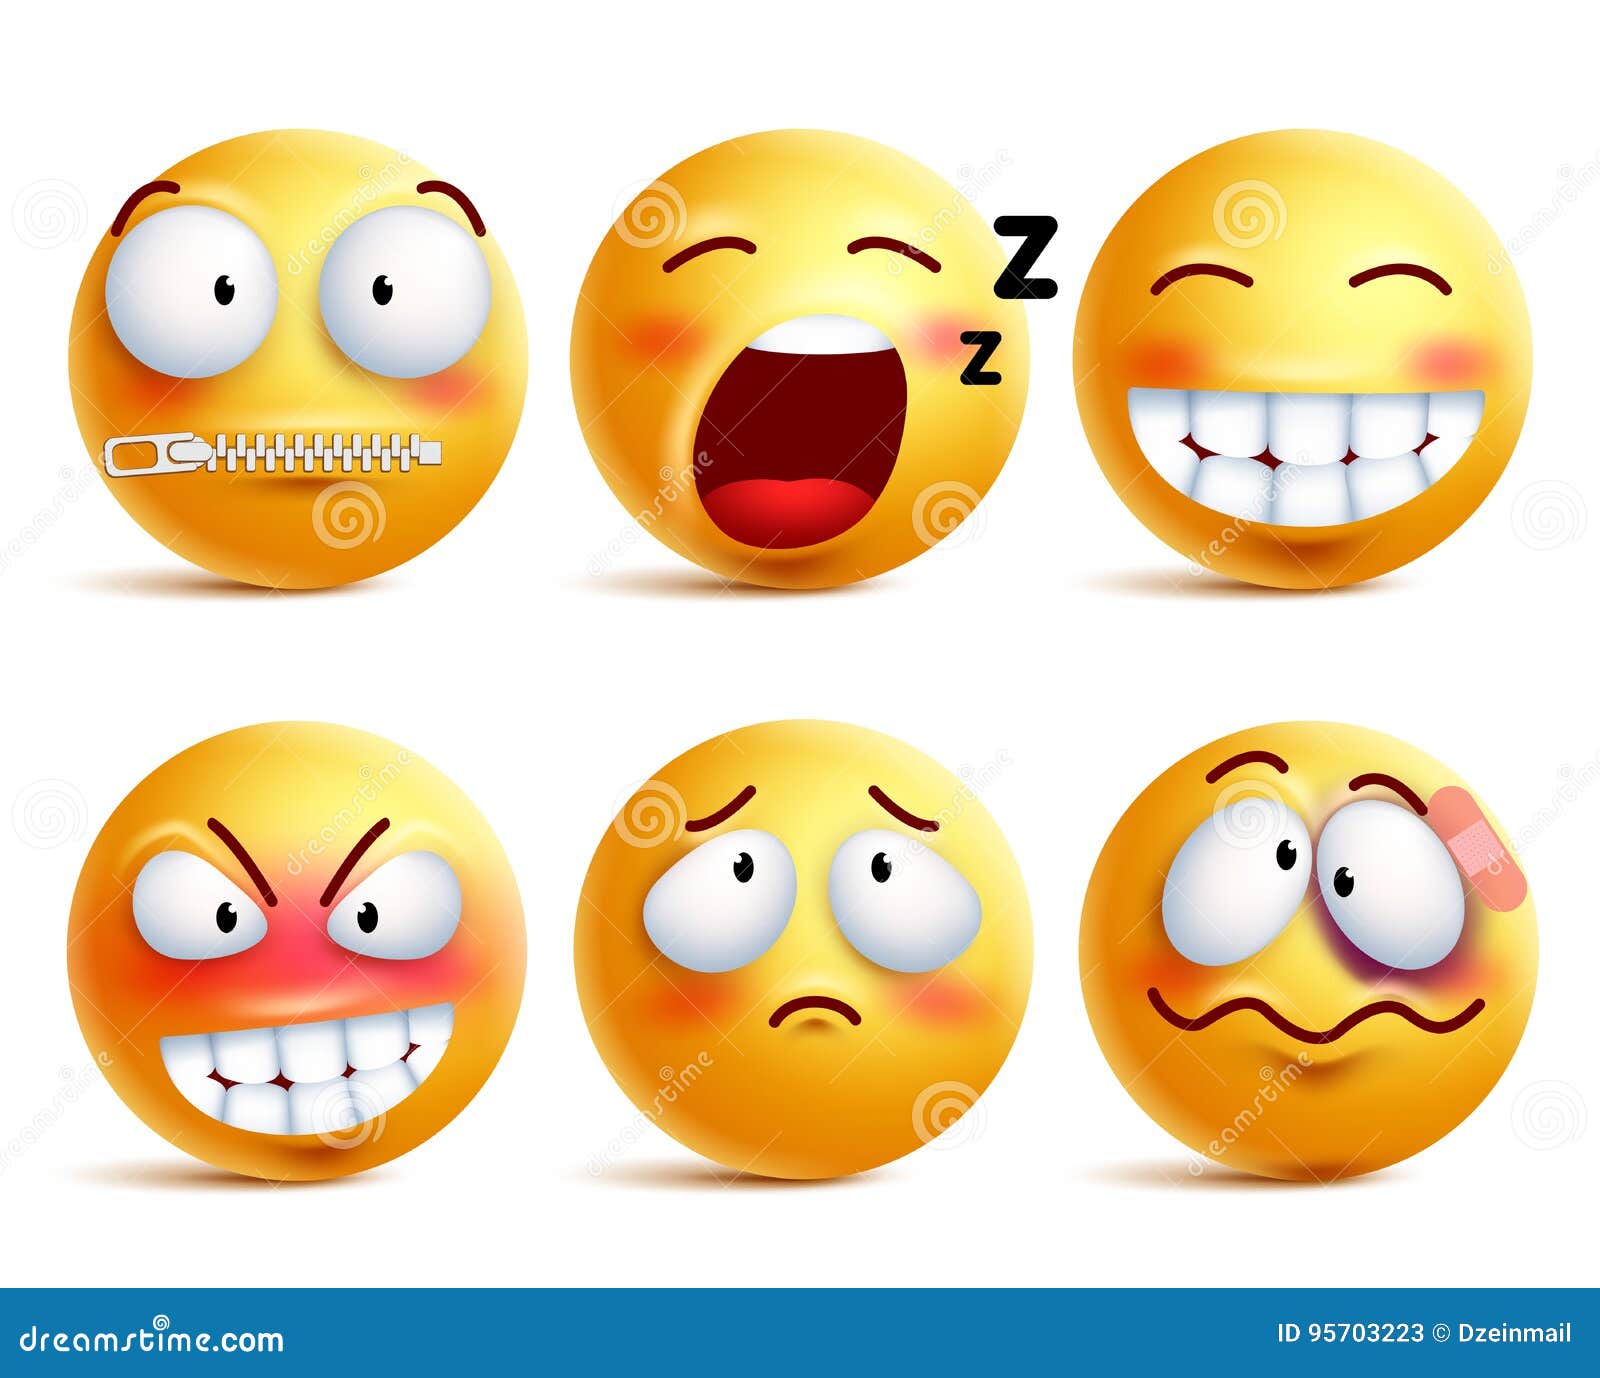 smileys  set. yellow smiley face or emoticons with facial expressions